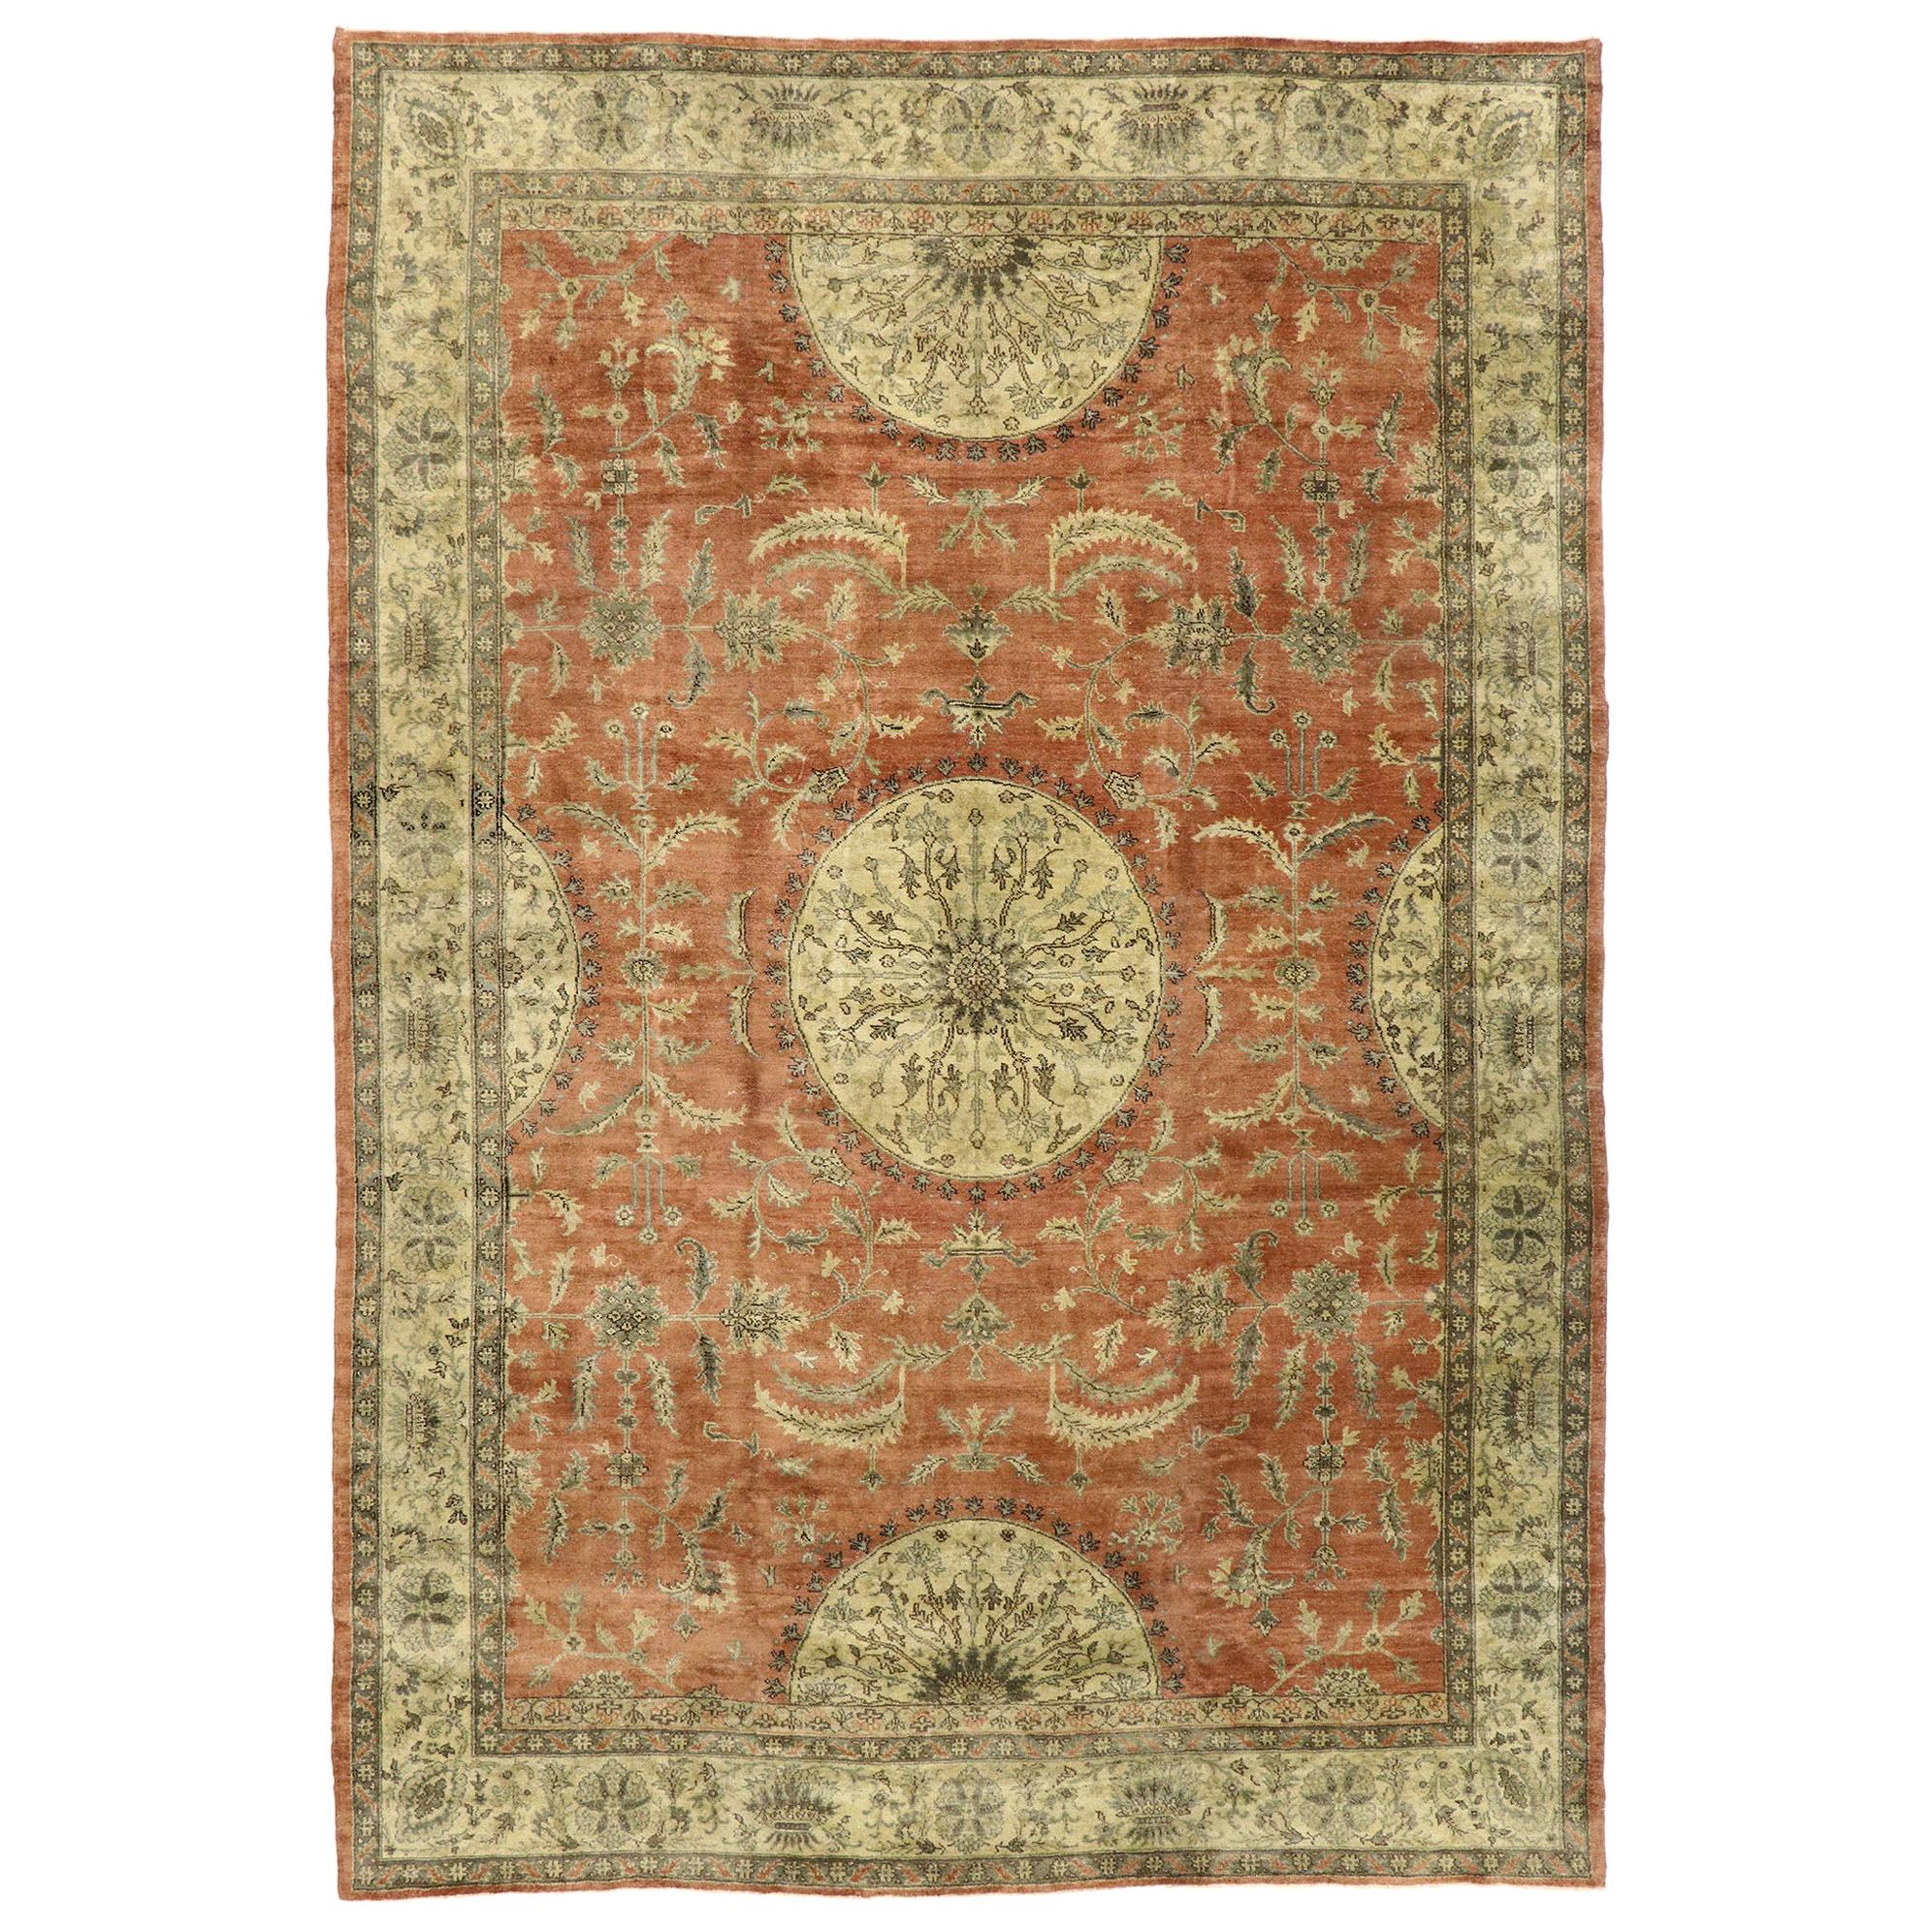 Distressed Vintage Turkish Oushak Rug with Rustic English Manor Style For Sale